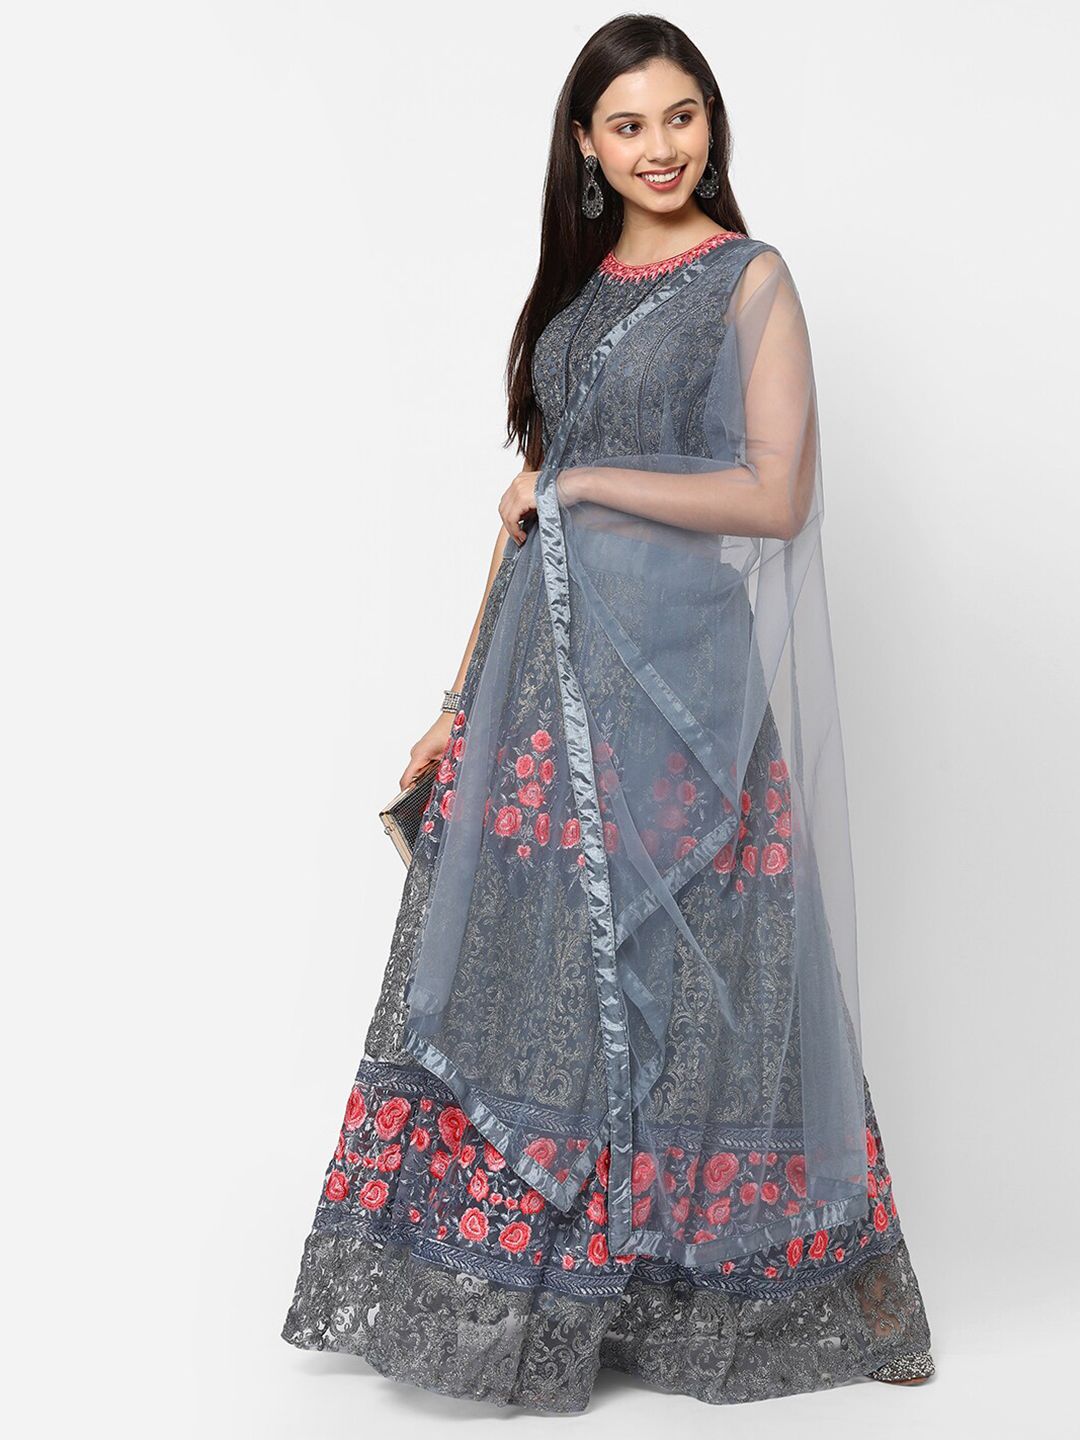 RedRound Grey & Red Embroidered Thread Work Semi-Stitched Lehenga & Unstitched Blouse With Dupatta Price in India